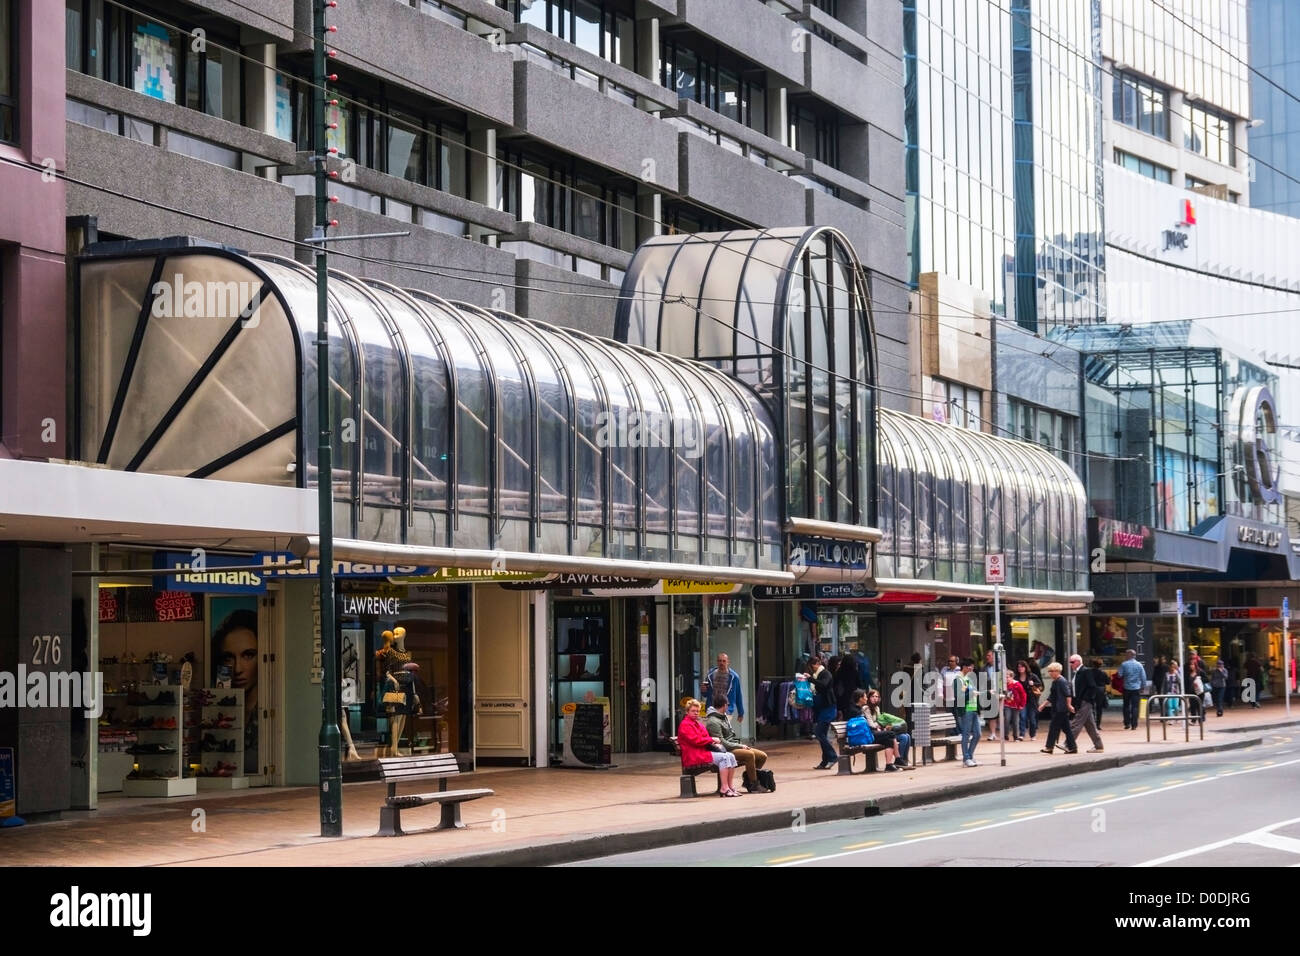 Lambton Quay, the main shopping street in Wellington, New Zealand, people sitting on benches, waiting at bus stop. Stock Photo